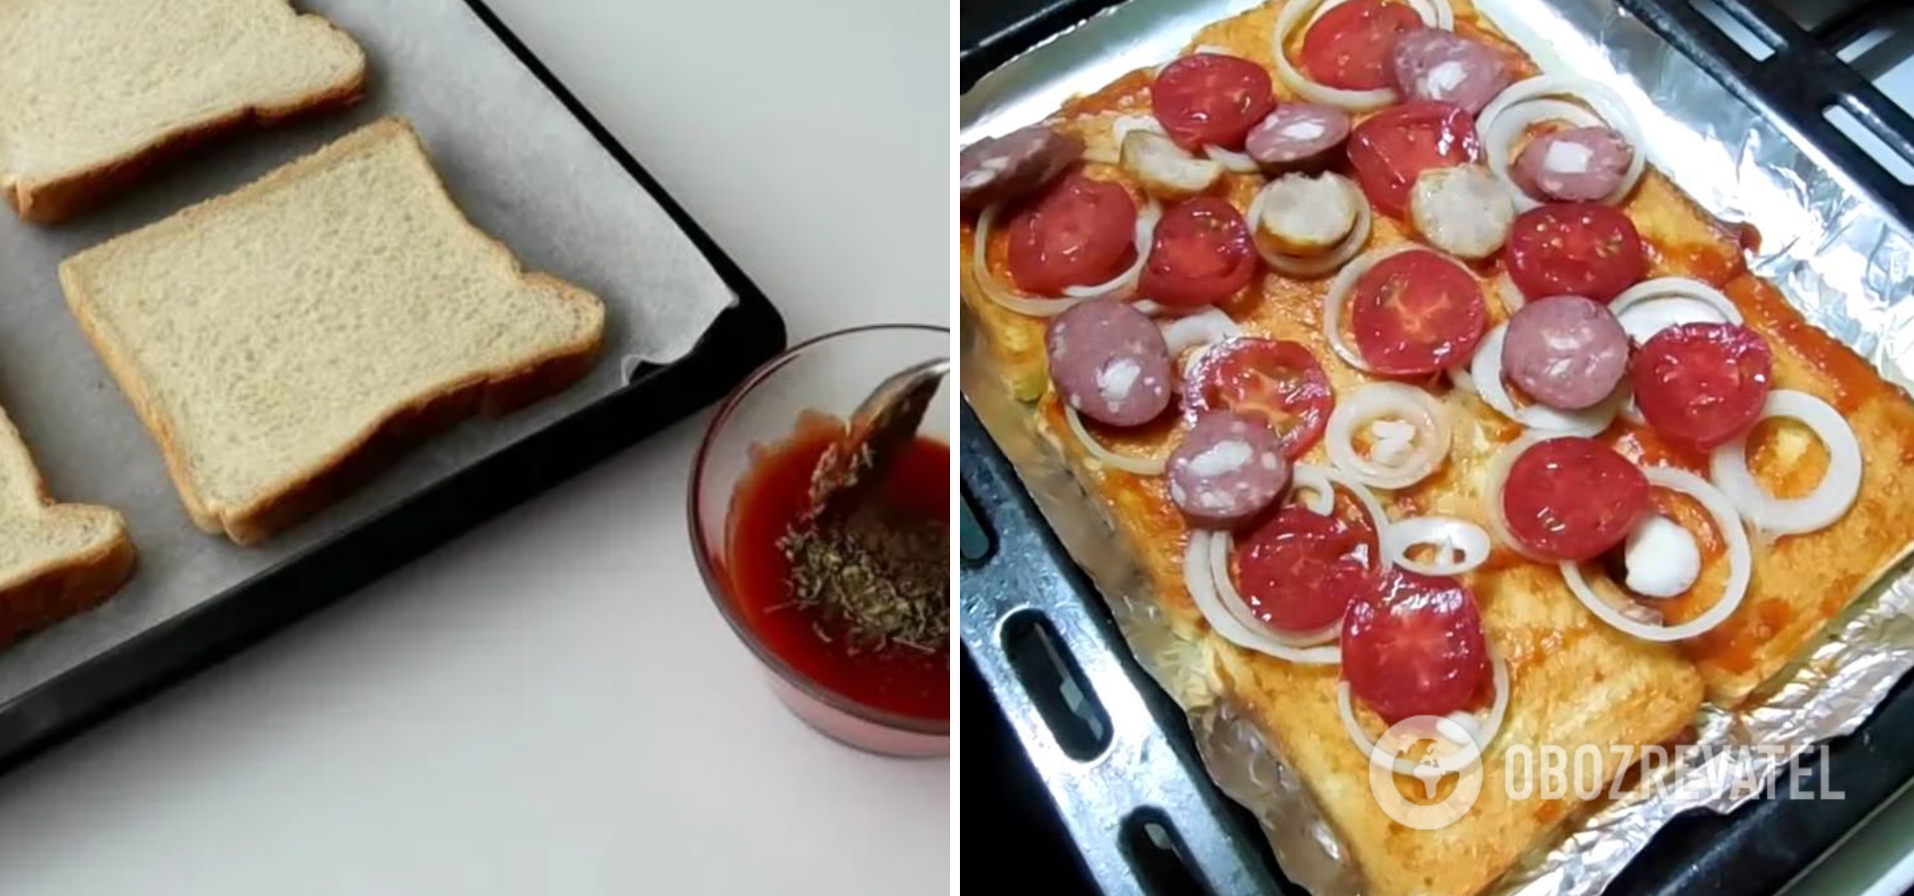 Pizza on toasted bread